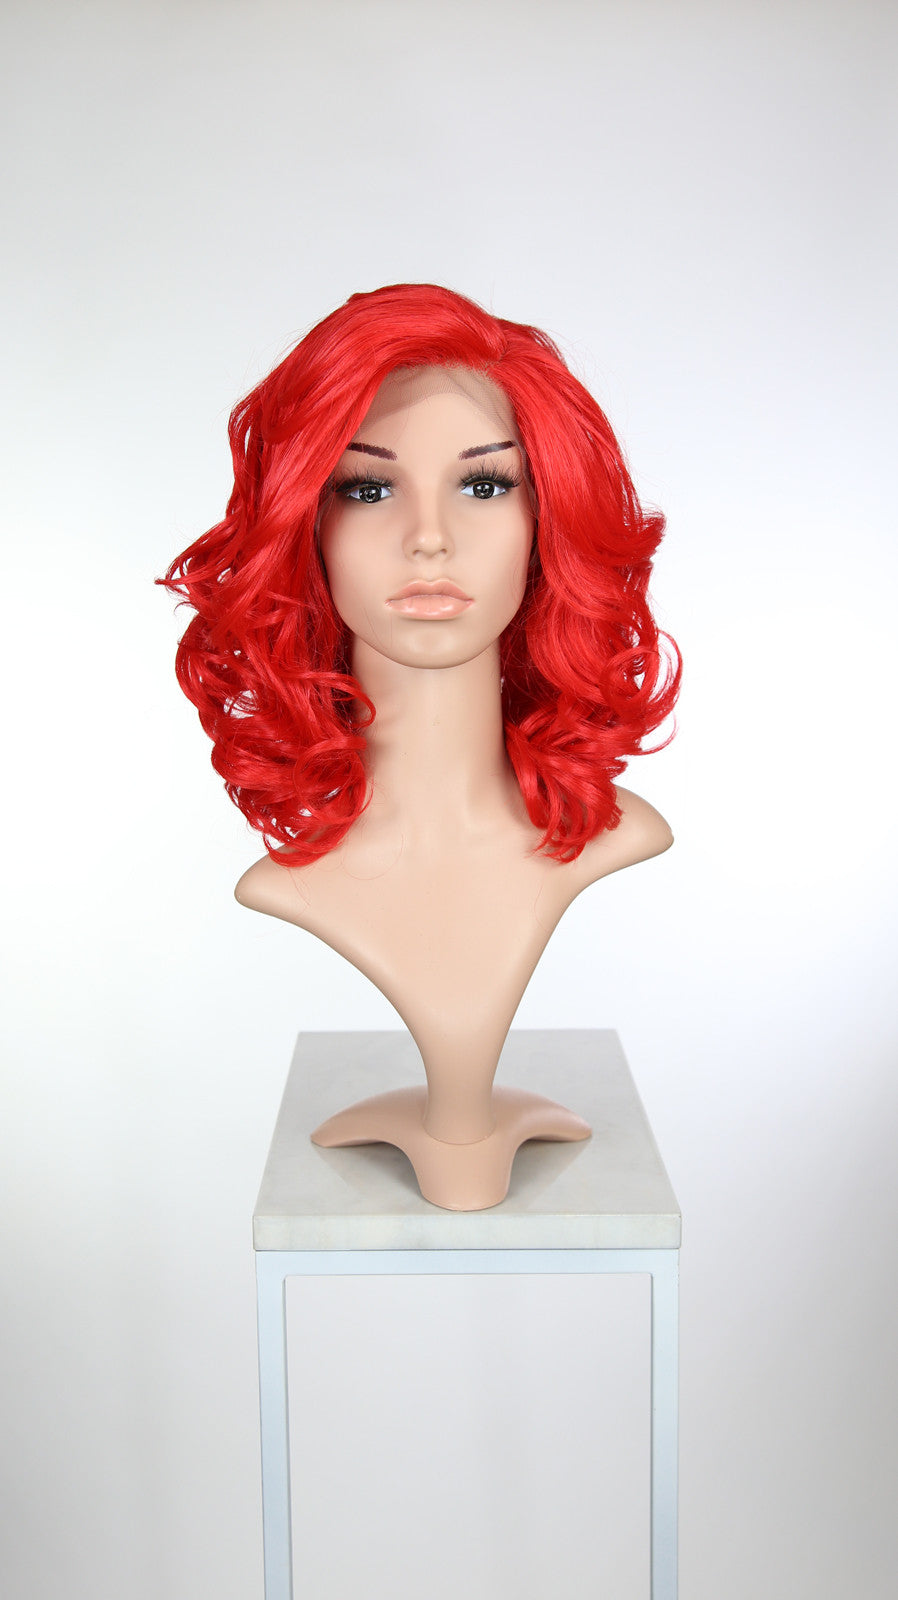 Bright Red Medium Length Curly Lace Front Wig - Duchess Series LDREA155